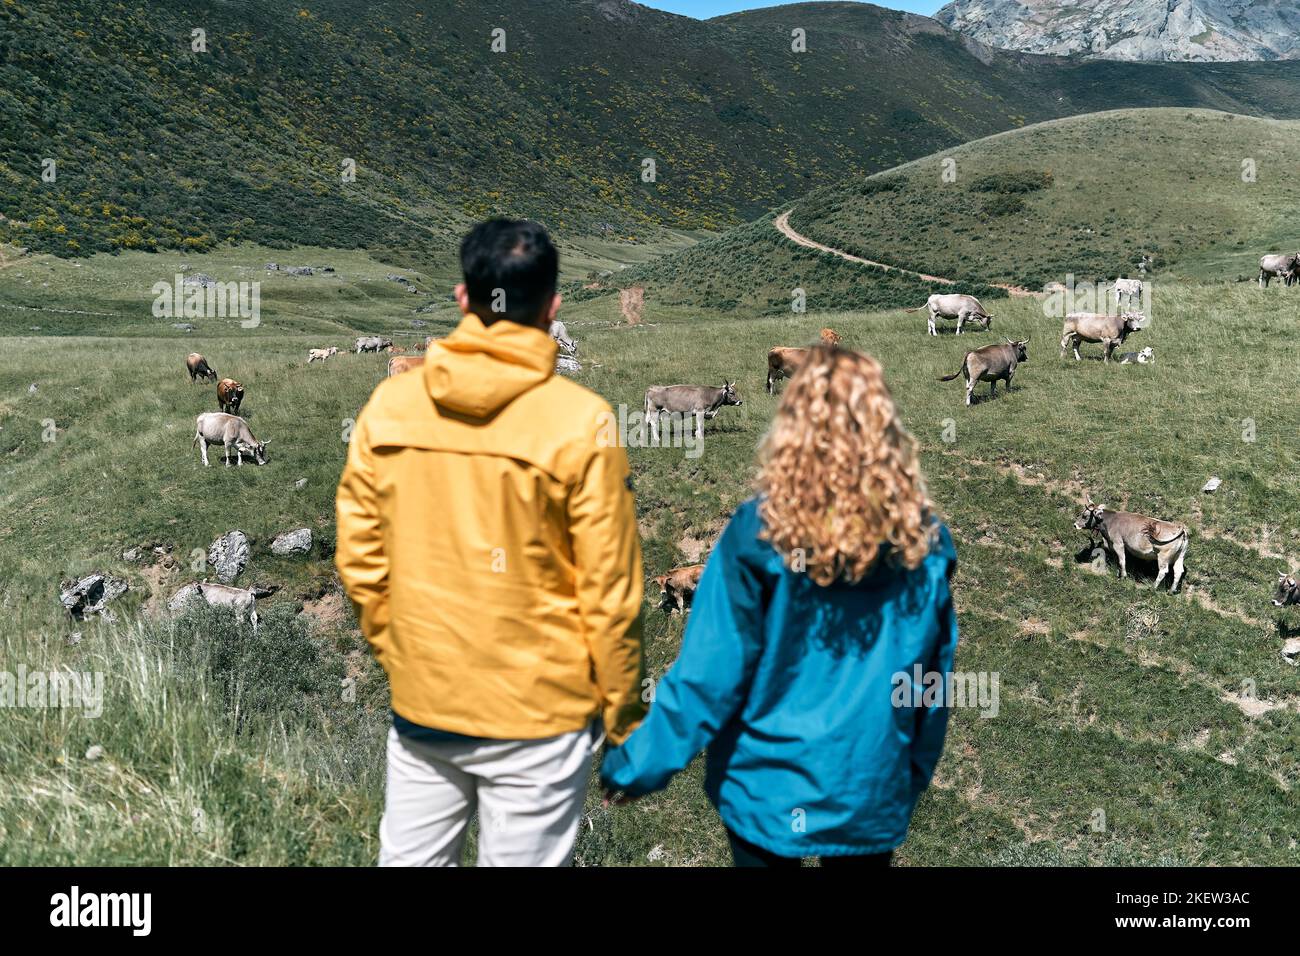 dark-haired boy with yellow jacket and blonde girl with blue jacket out of focus from behind holding hands standing contemplating the cows in the Stock Photo